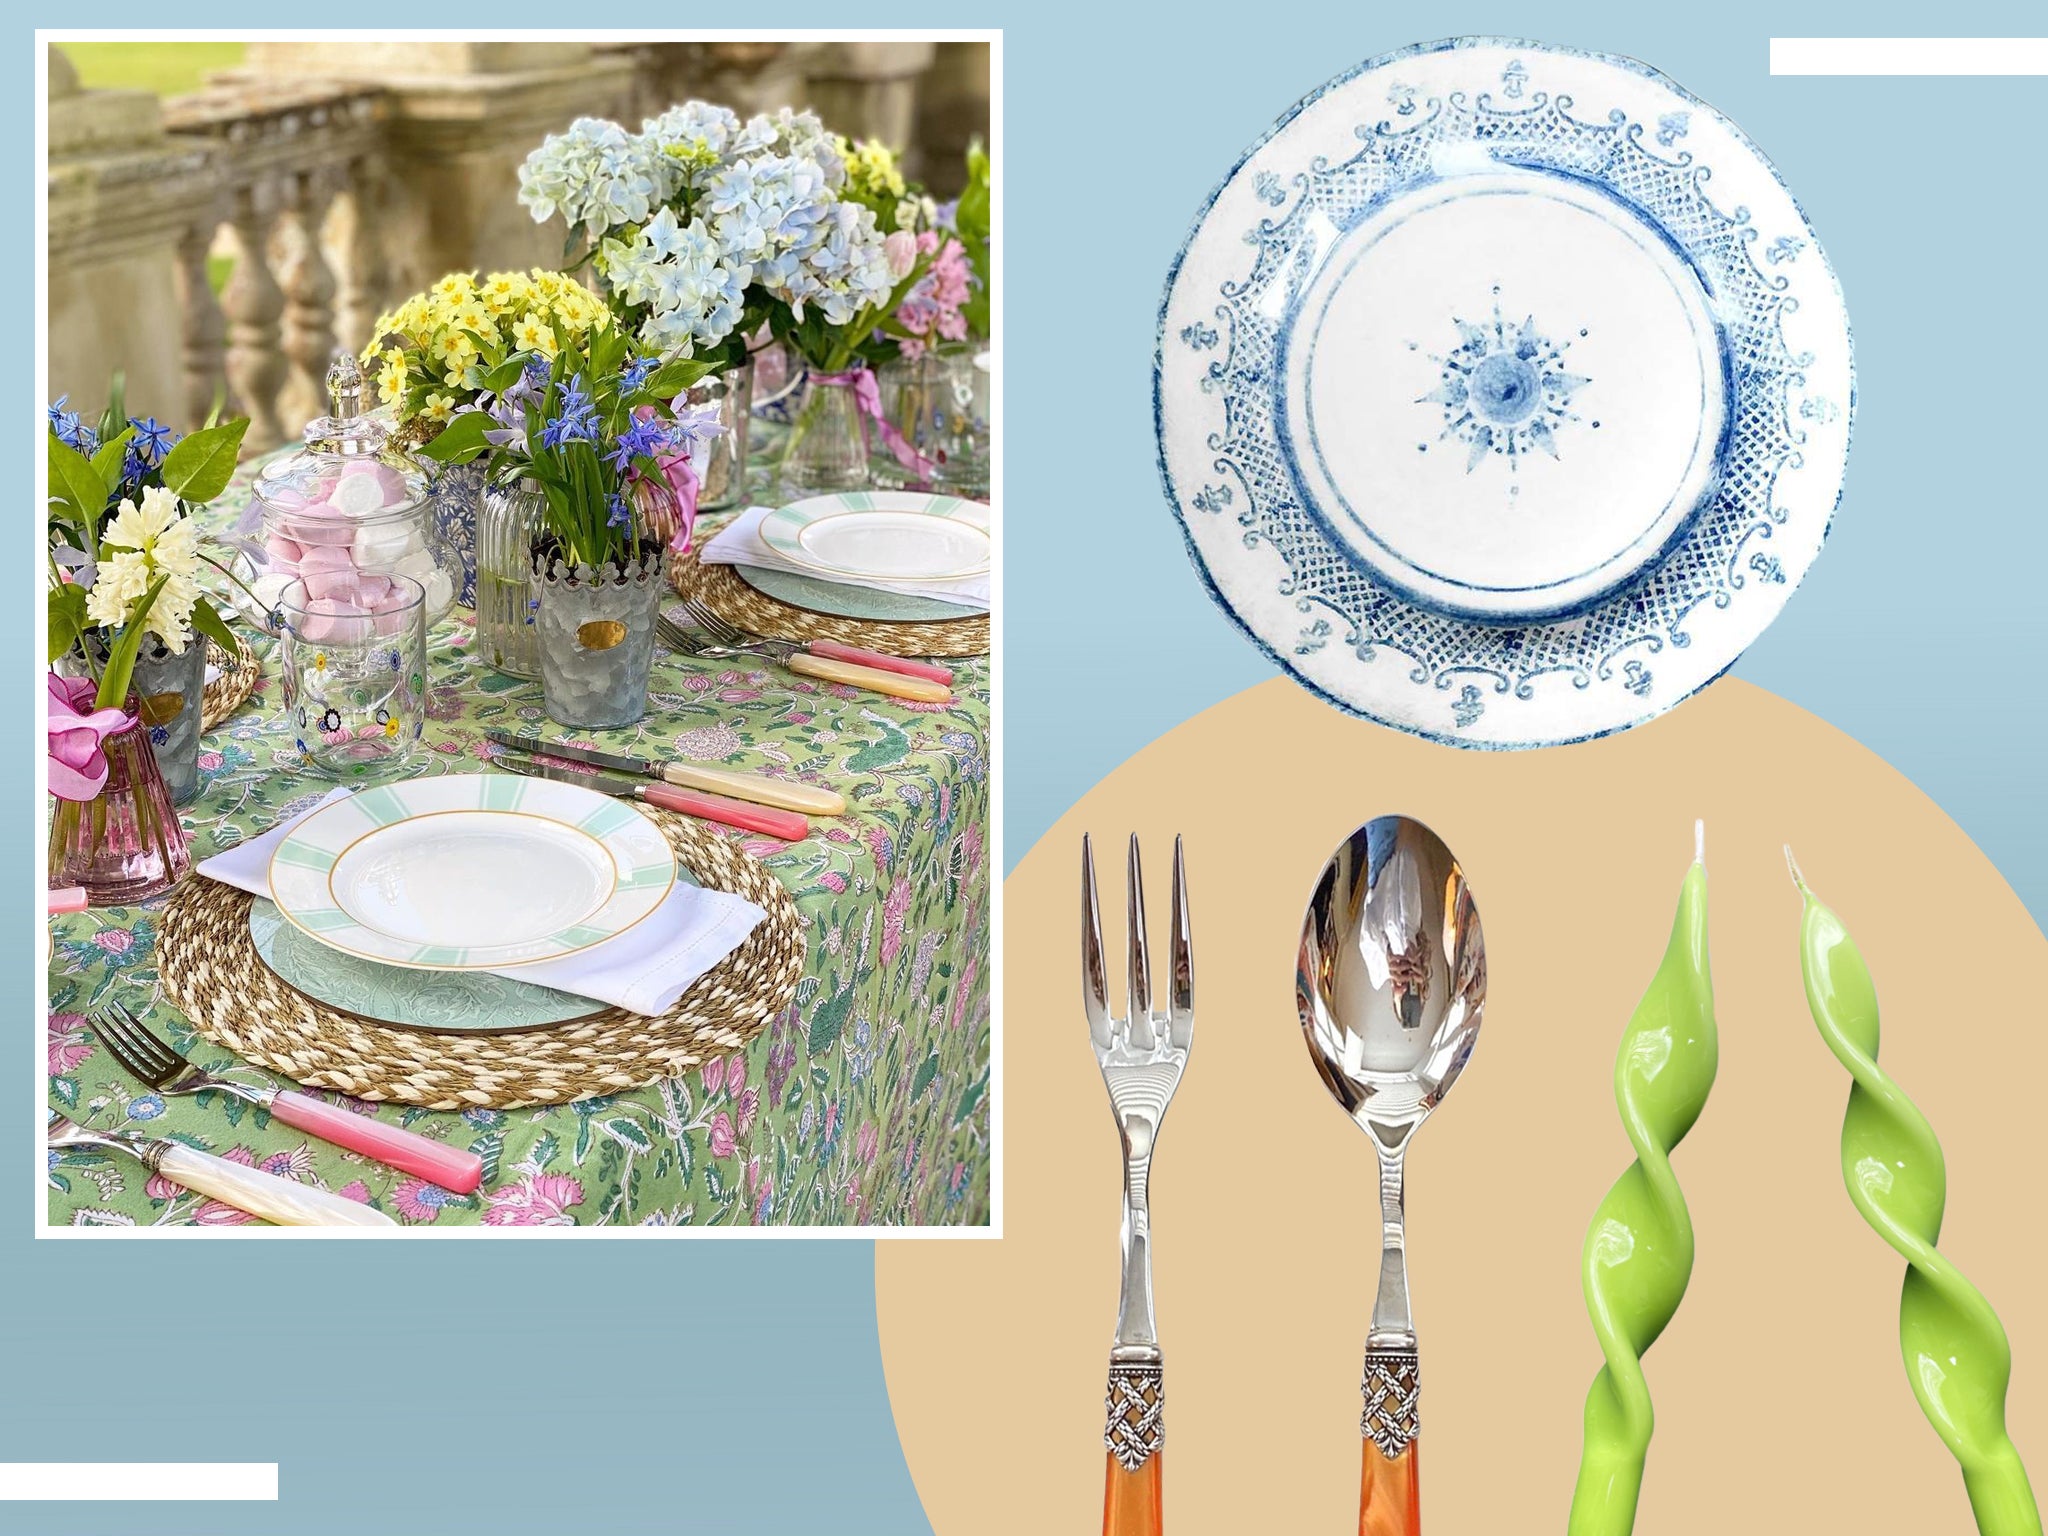 Make a statement with colour schemes and styling details like napkins, candles and cutlery